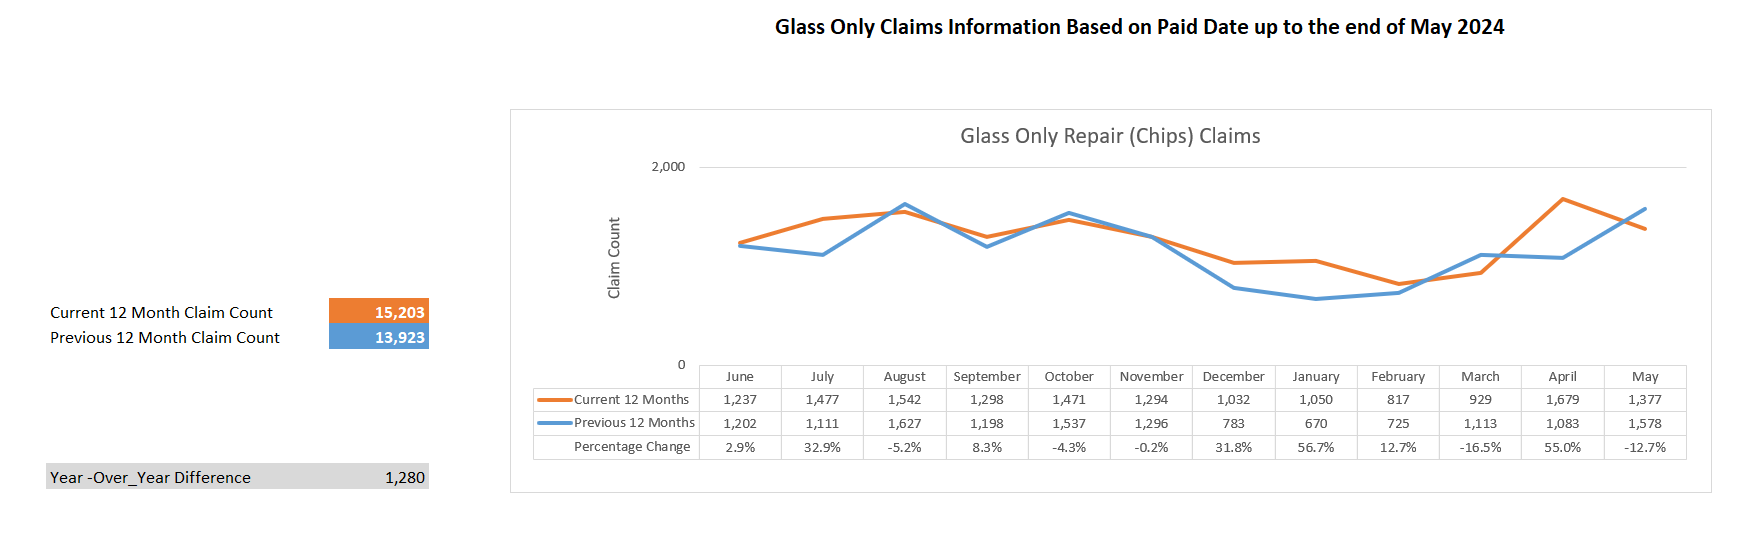 Glass Only Claims Reported